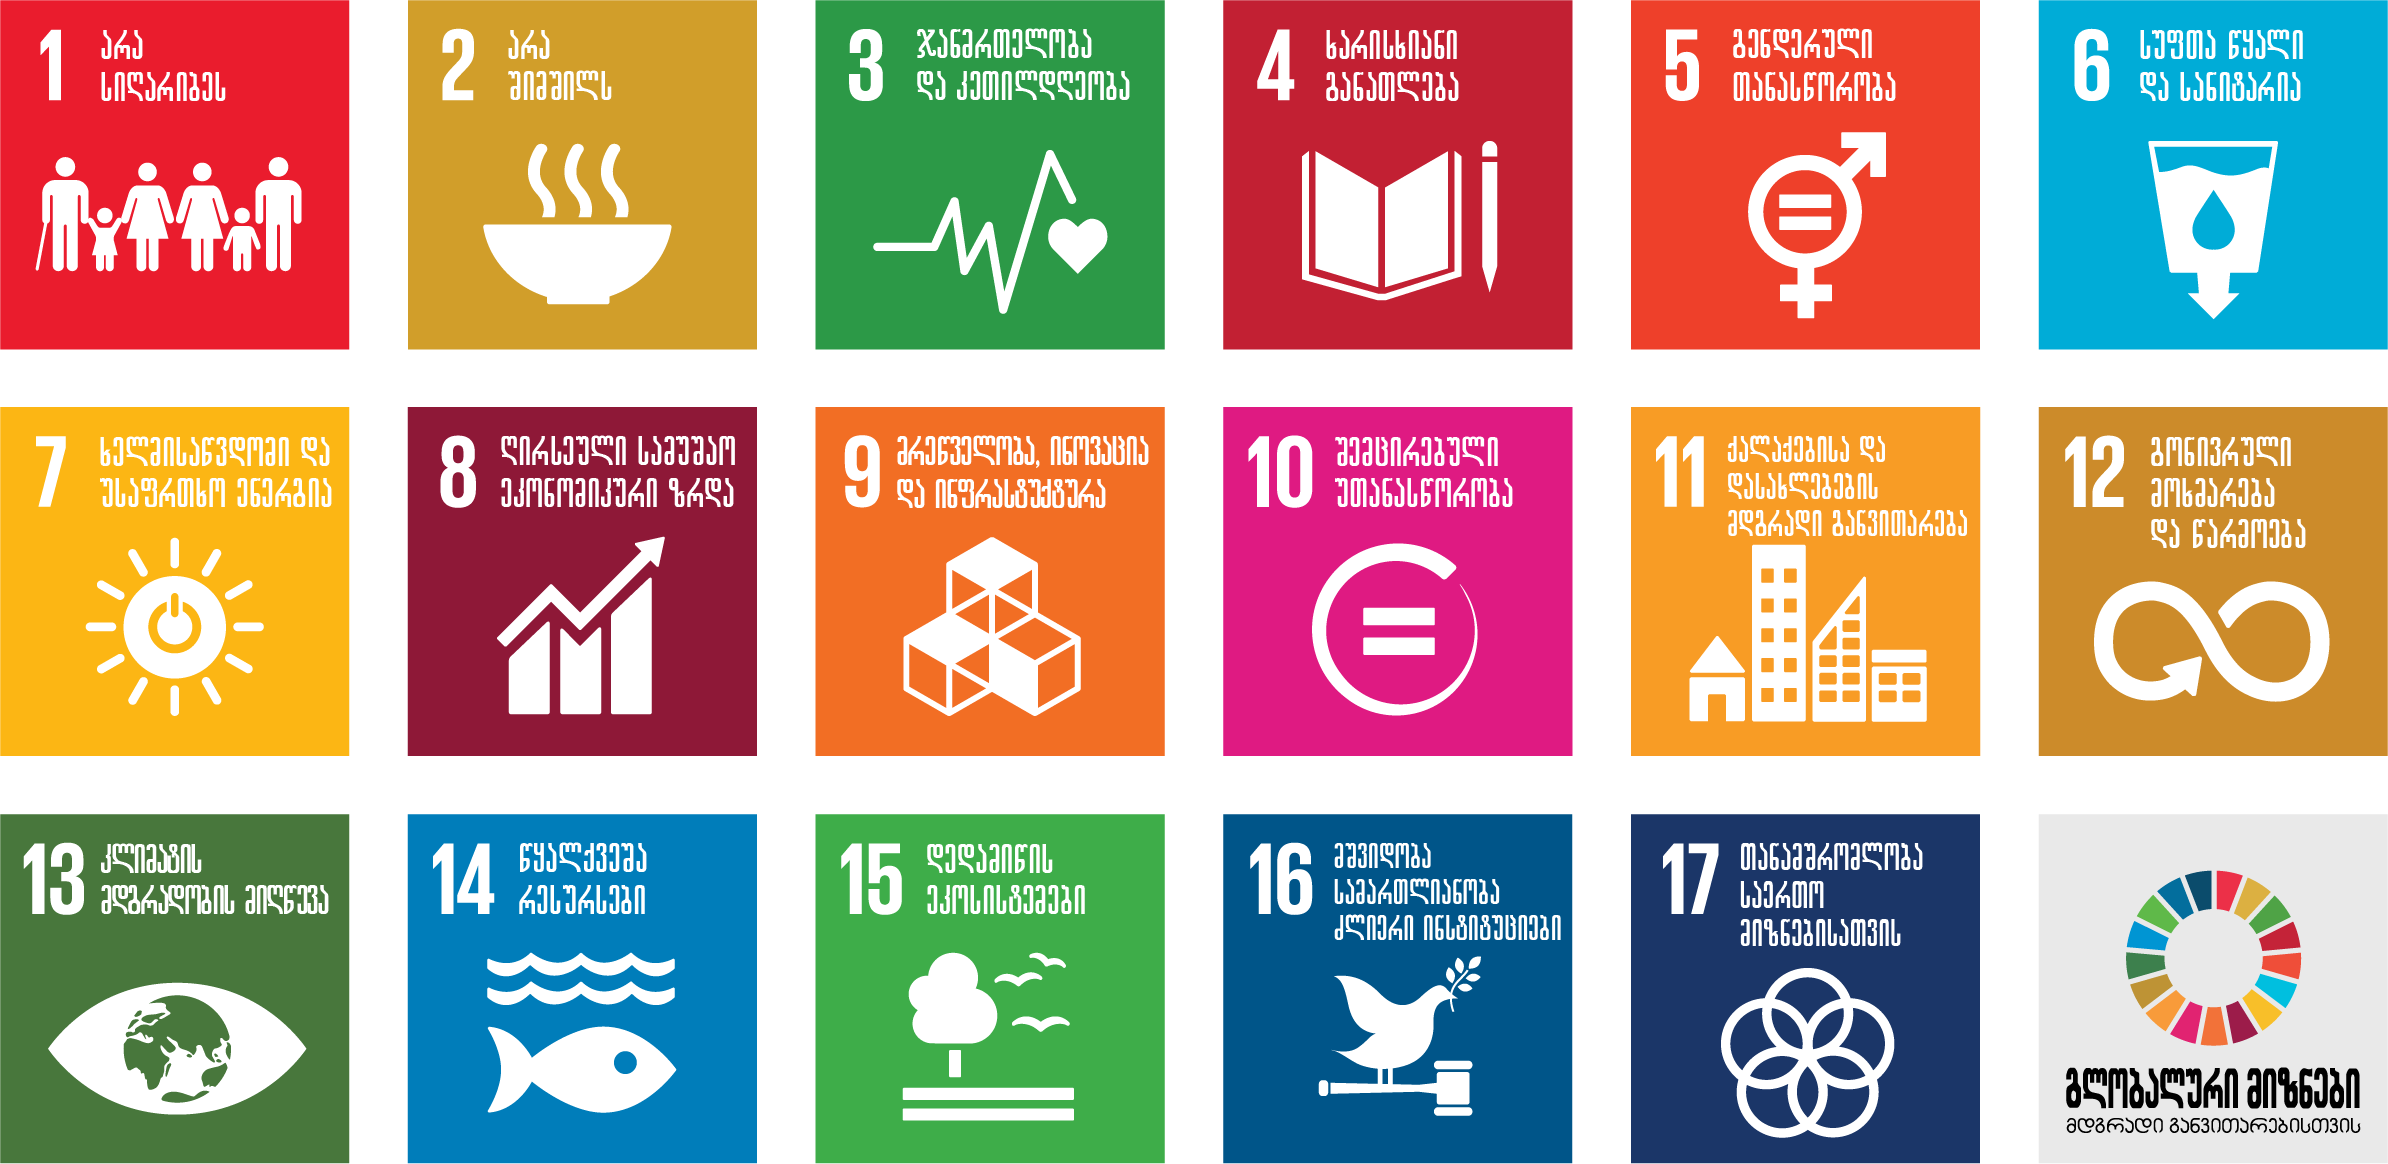 why are sustainable development goals important?